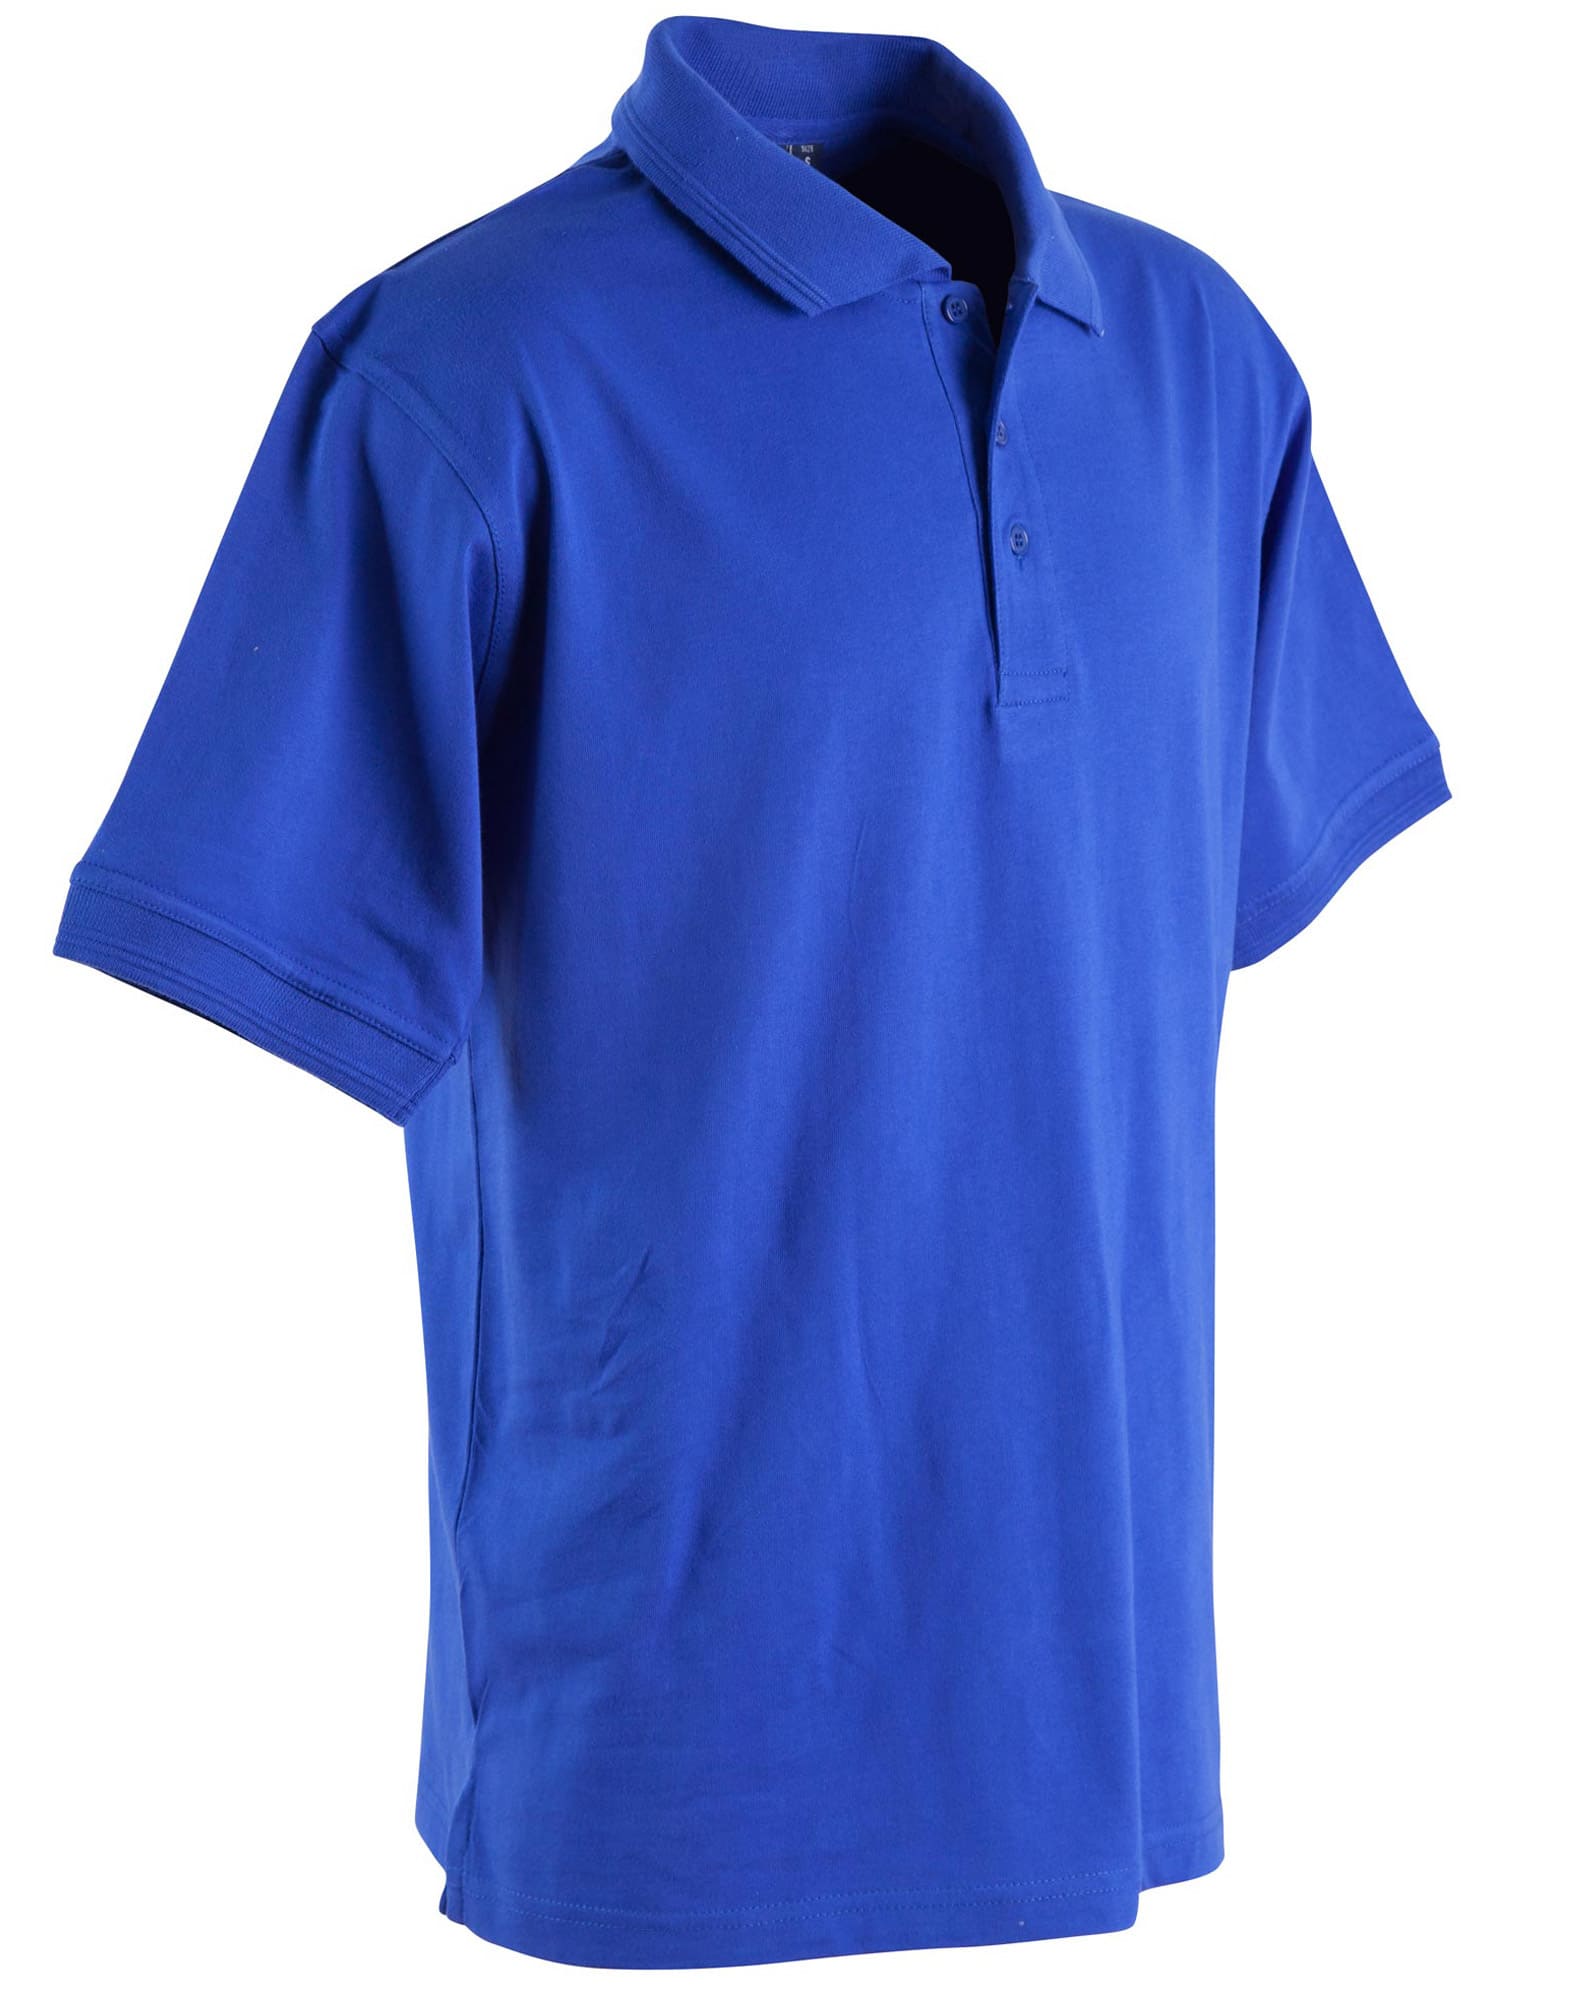 Custom (Royal) Macquarie Unisex Contrast Cotton Kit Polos Online in Perth